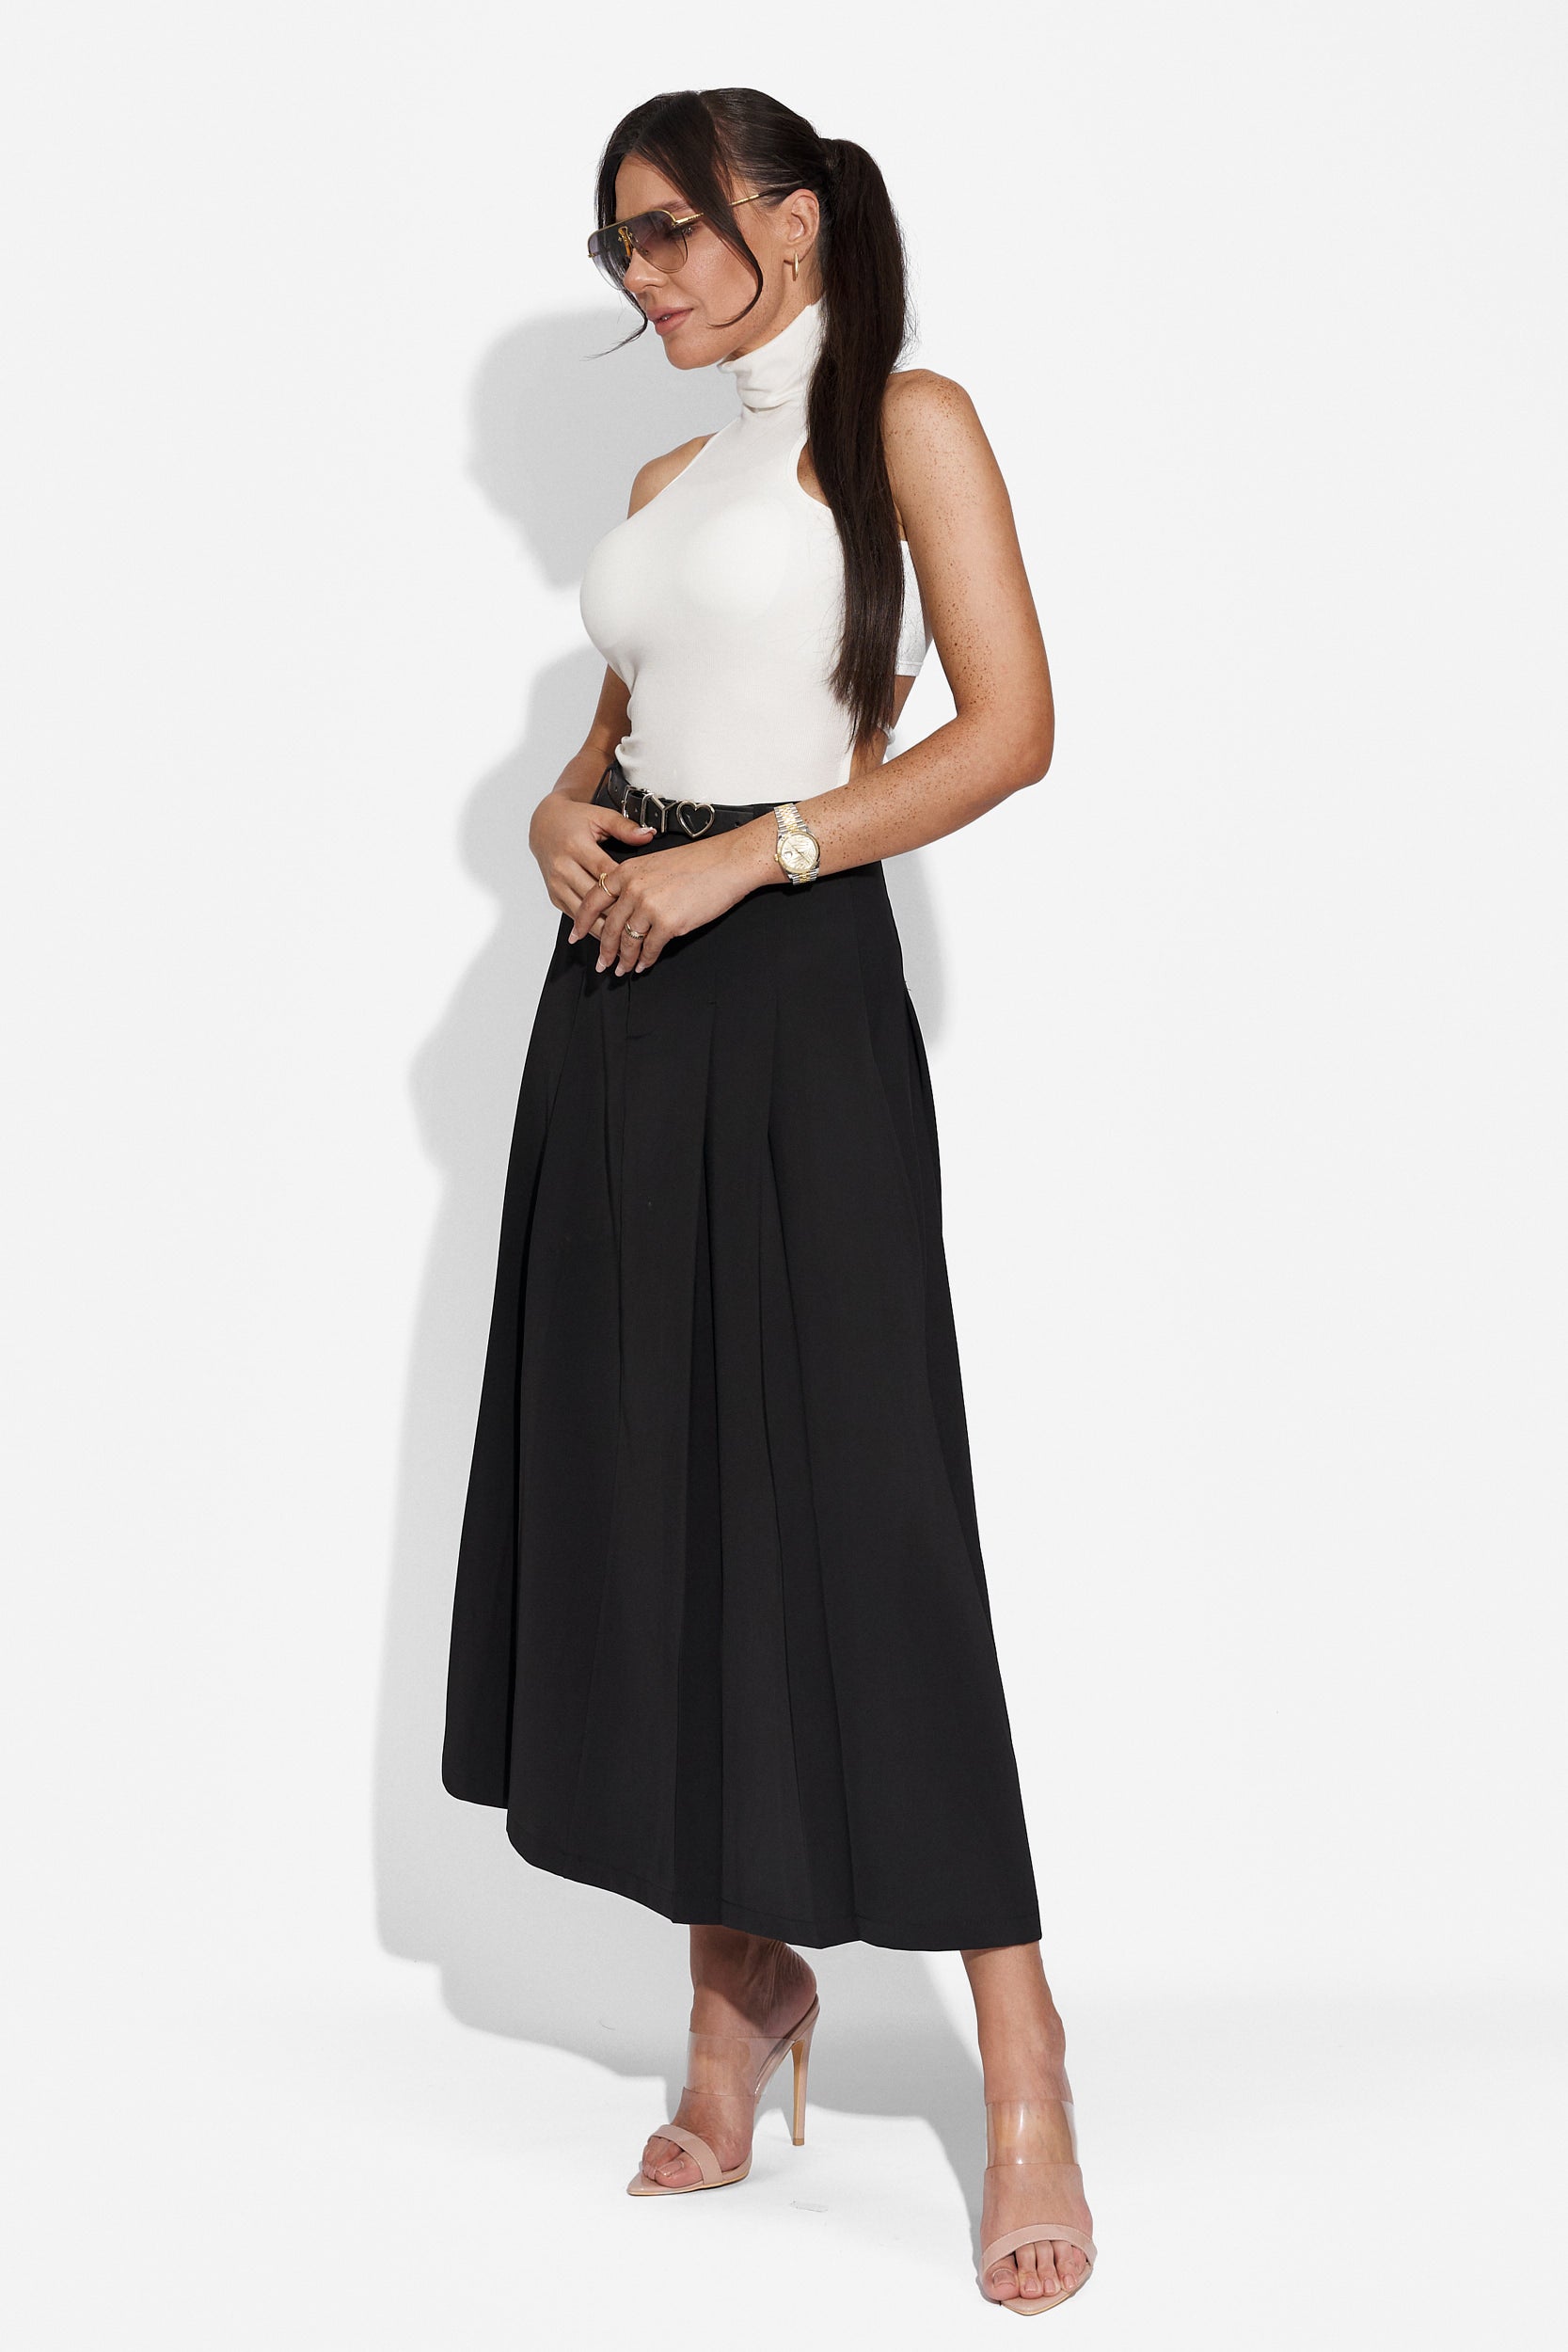 Geamina Bogas black casual lady skirt